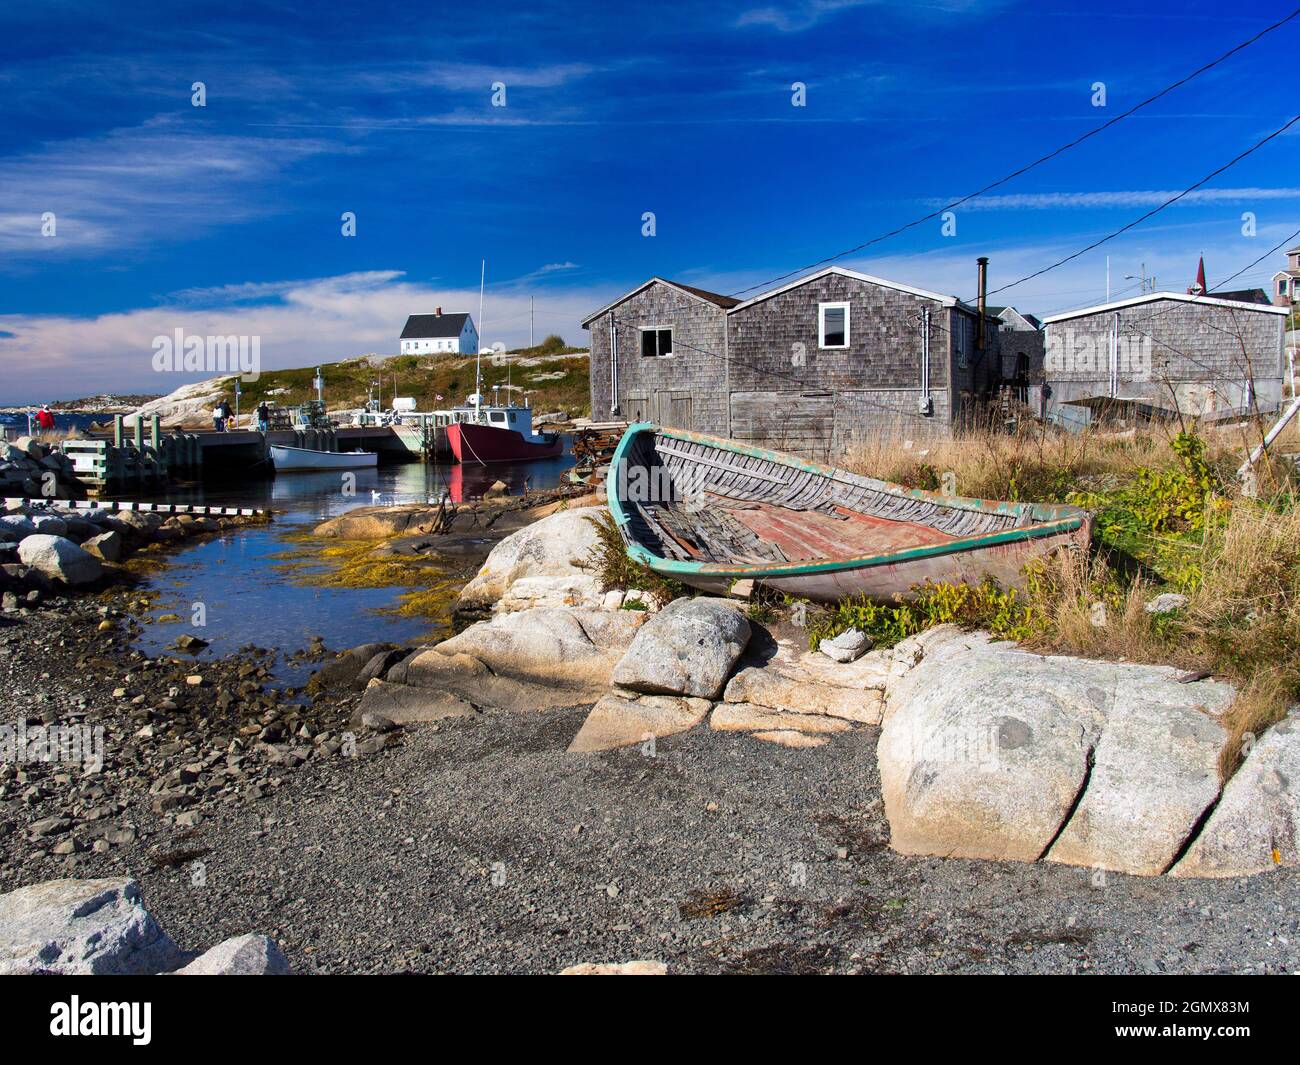 Peggy's Cove, Nova Scotia, Canada - 11 October 2013   Peggy's Cove is a tiny, quaint fishing village located on the eastern shore of St. Margarets Bay Stock Photo